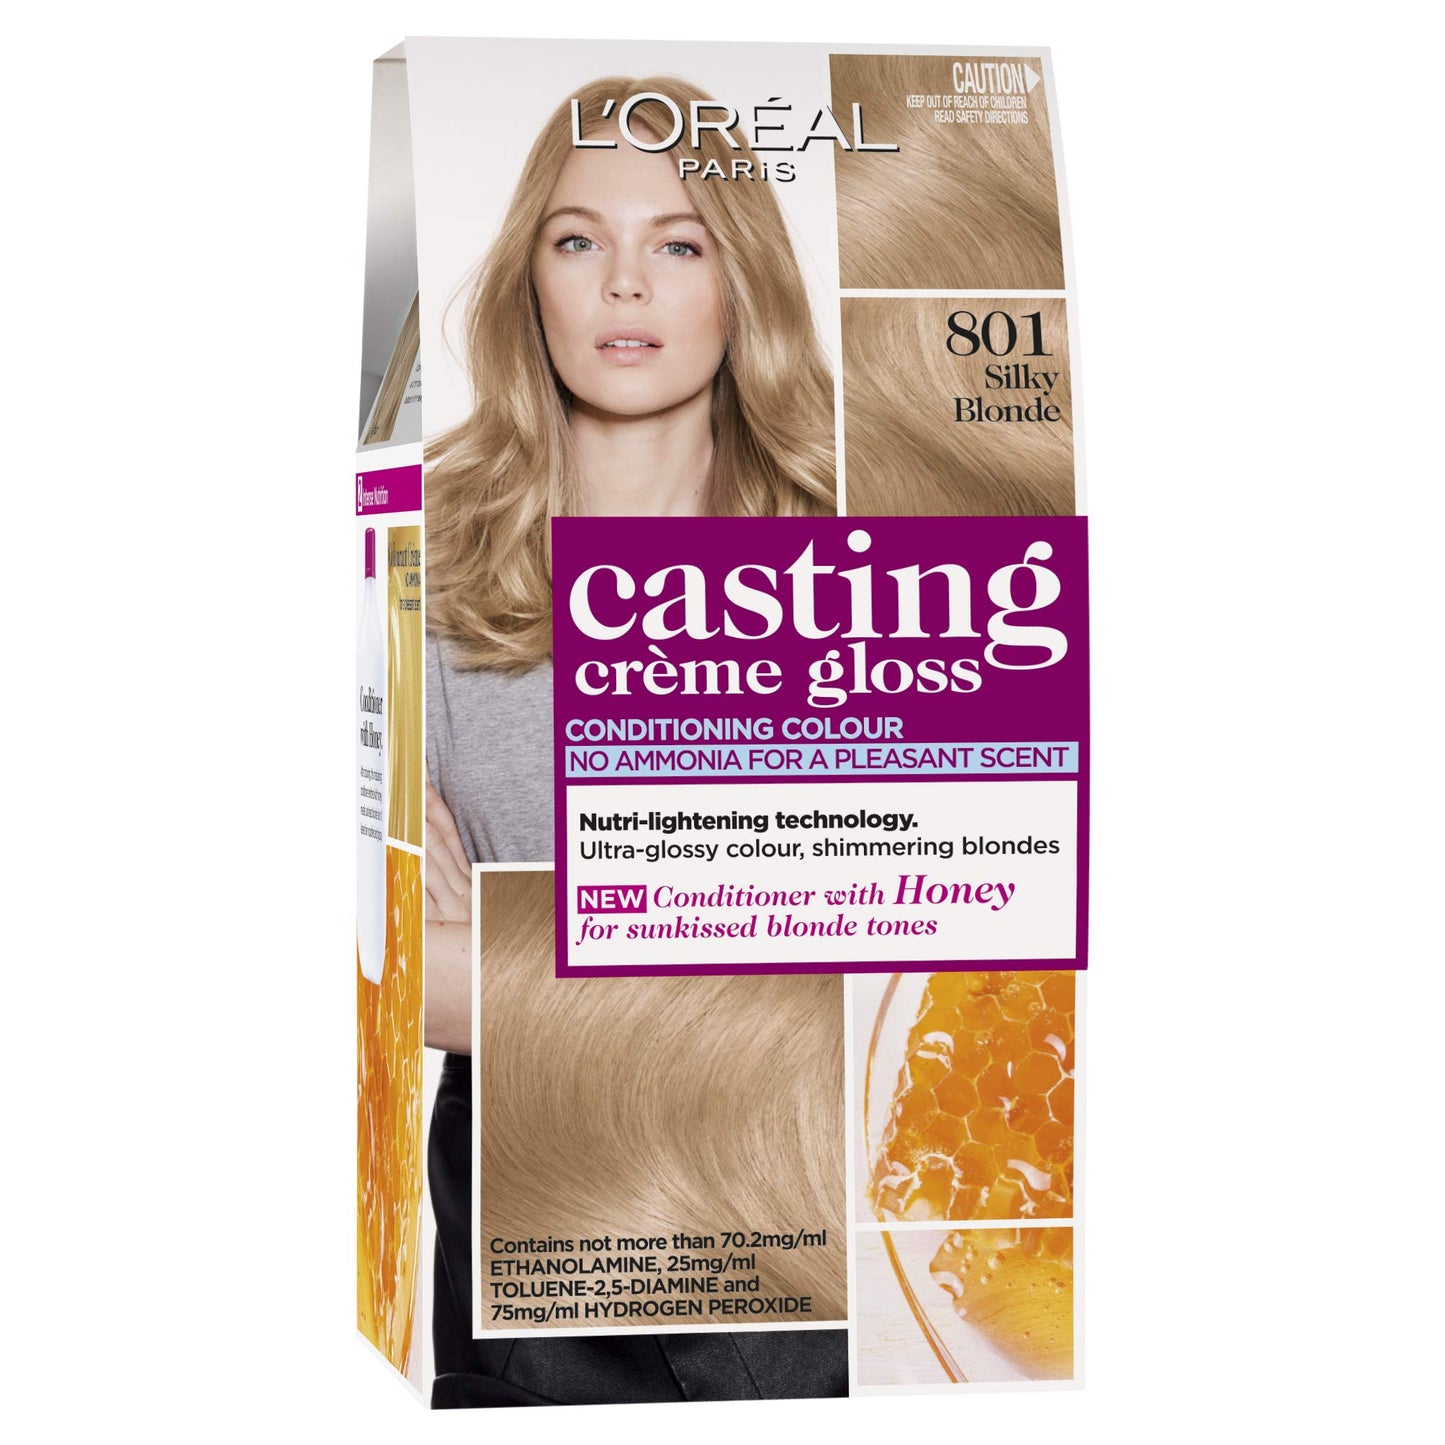 L'Oréal Casting Creme Gloss Conditioning Hair Colour - 801 Silky Blonde - Homeware Discounts